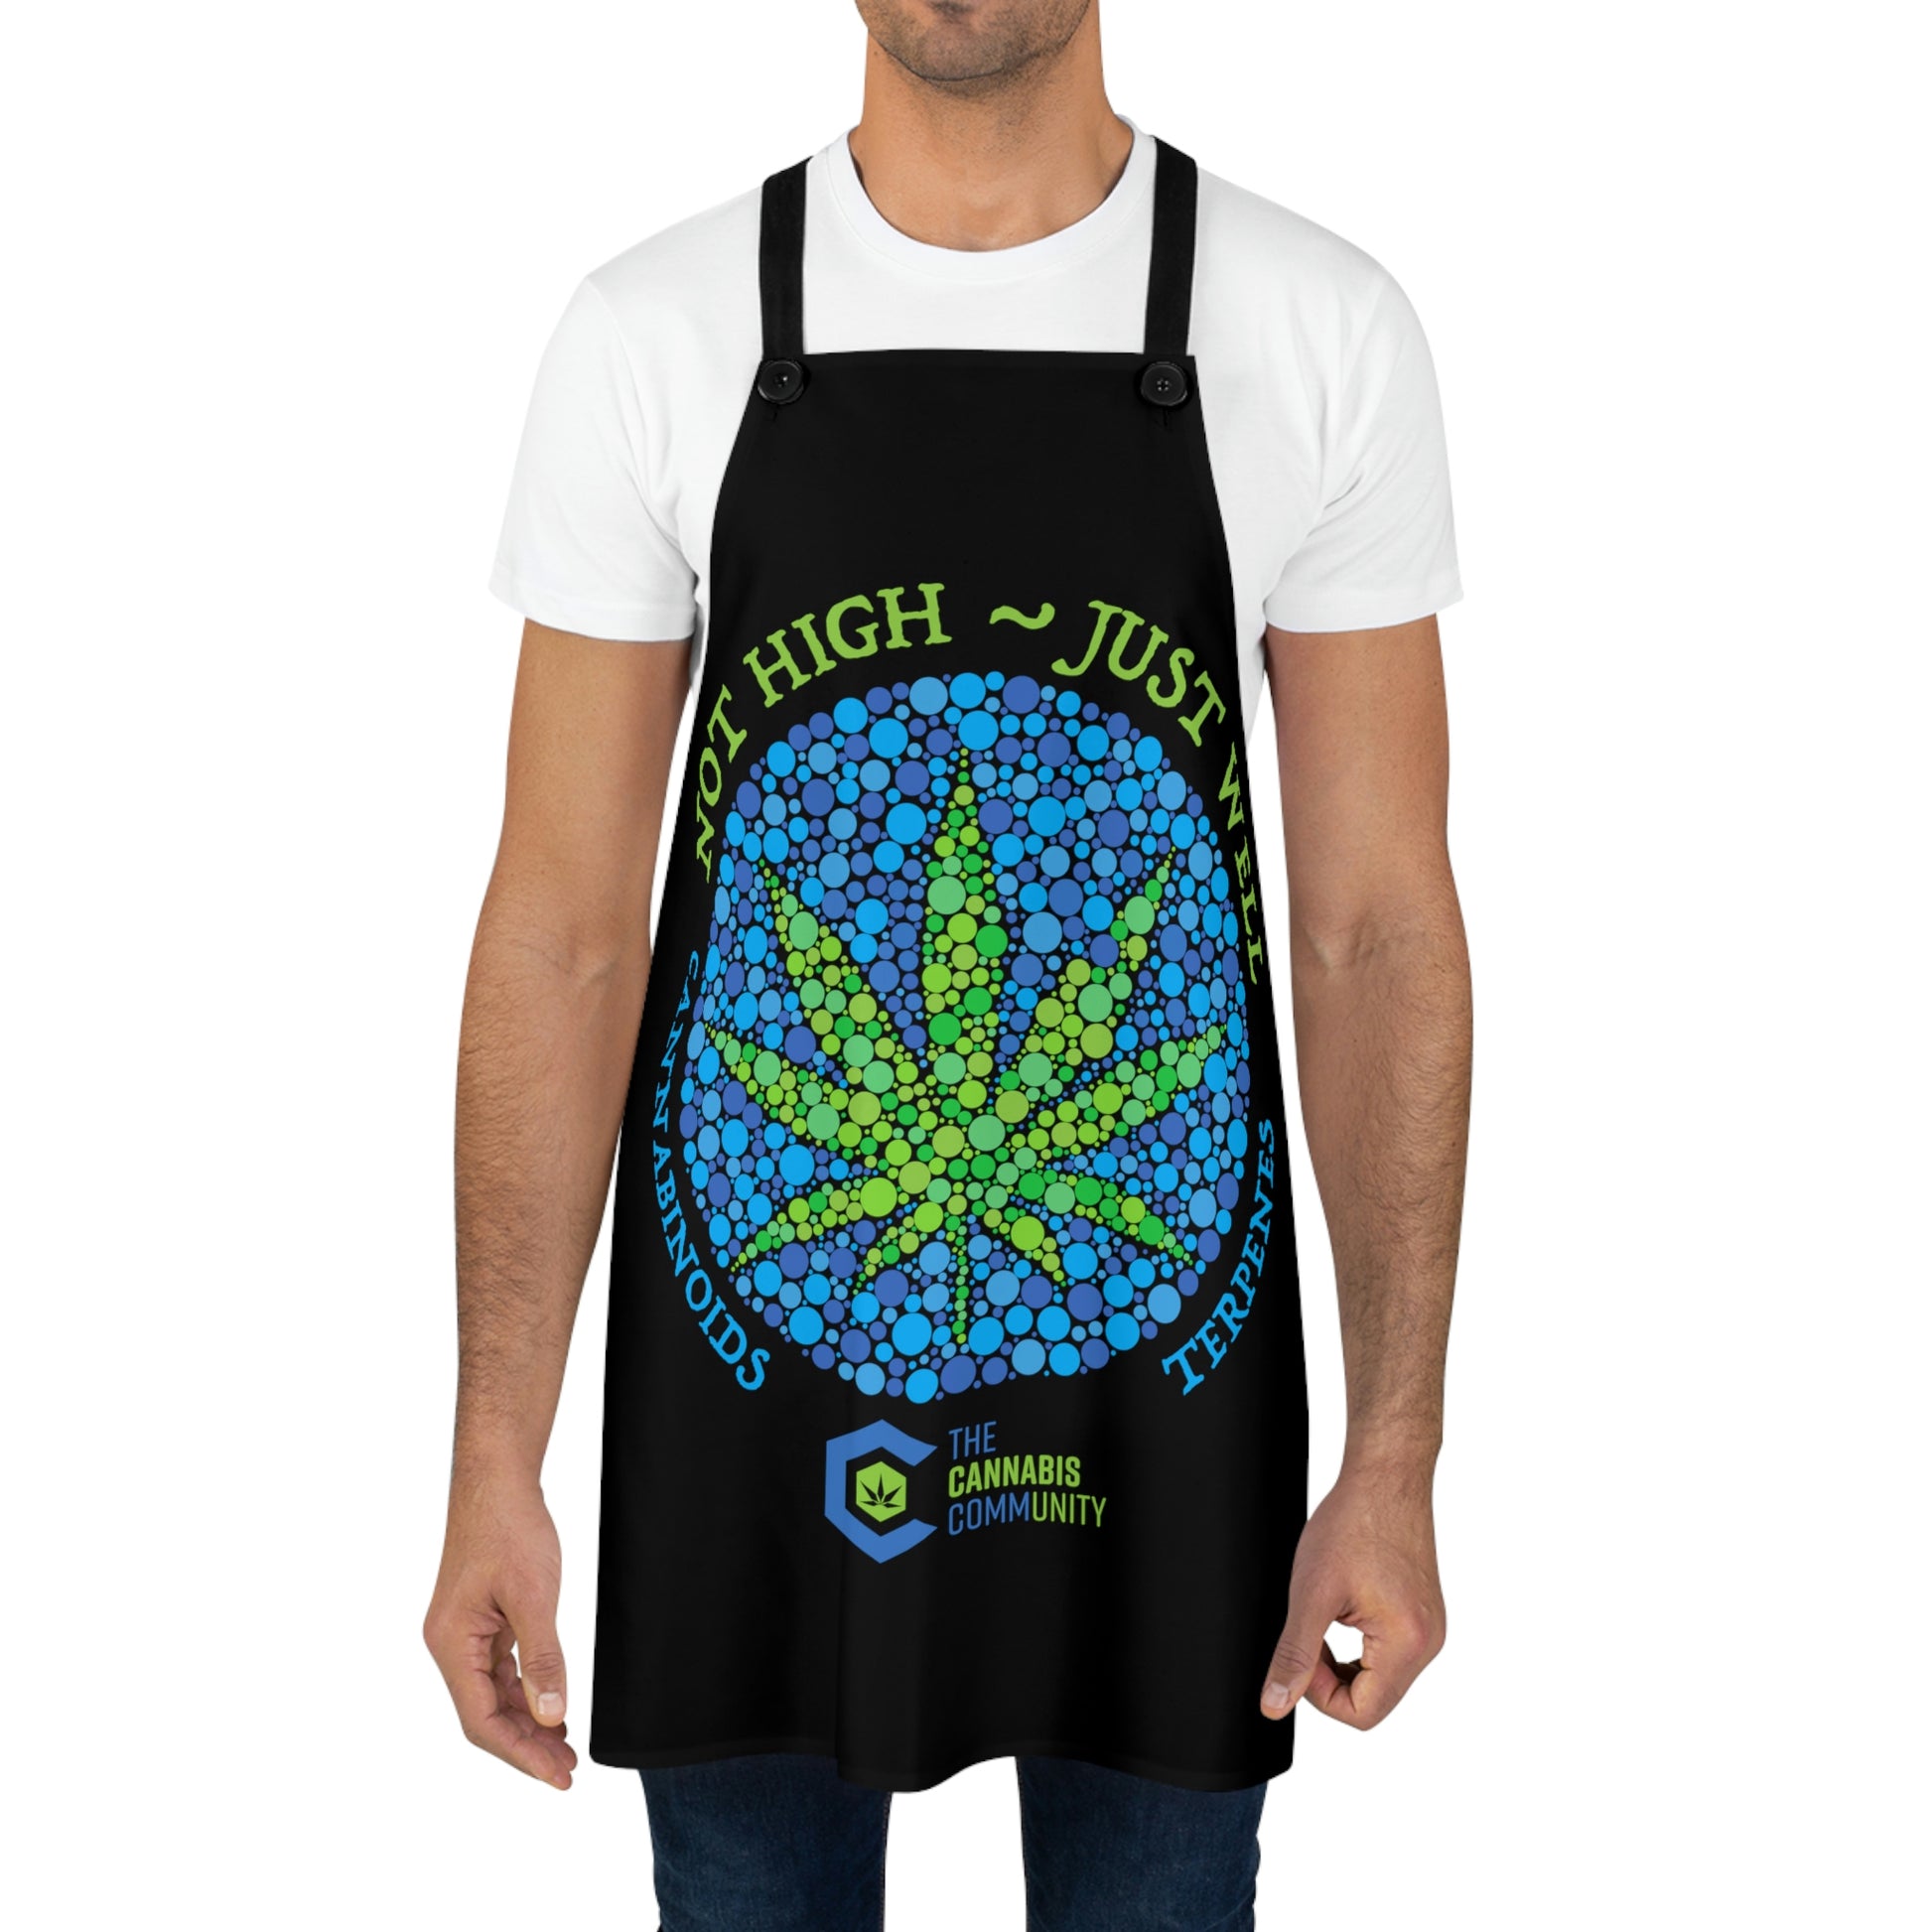 A man wearing the black blue and green Not High, Just Well Chef's Apron with cannabis leaf in the center